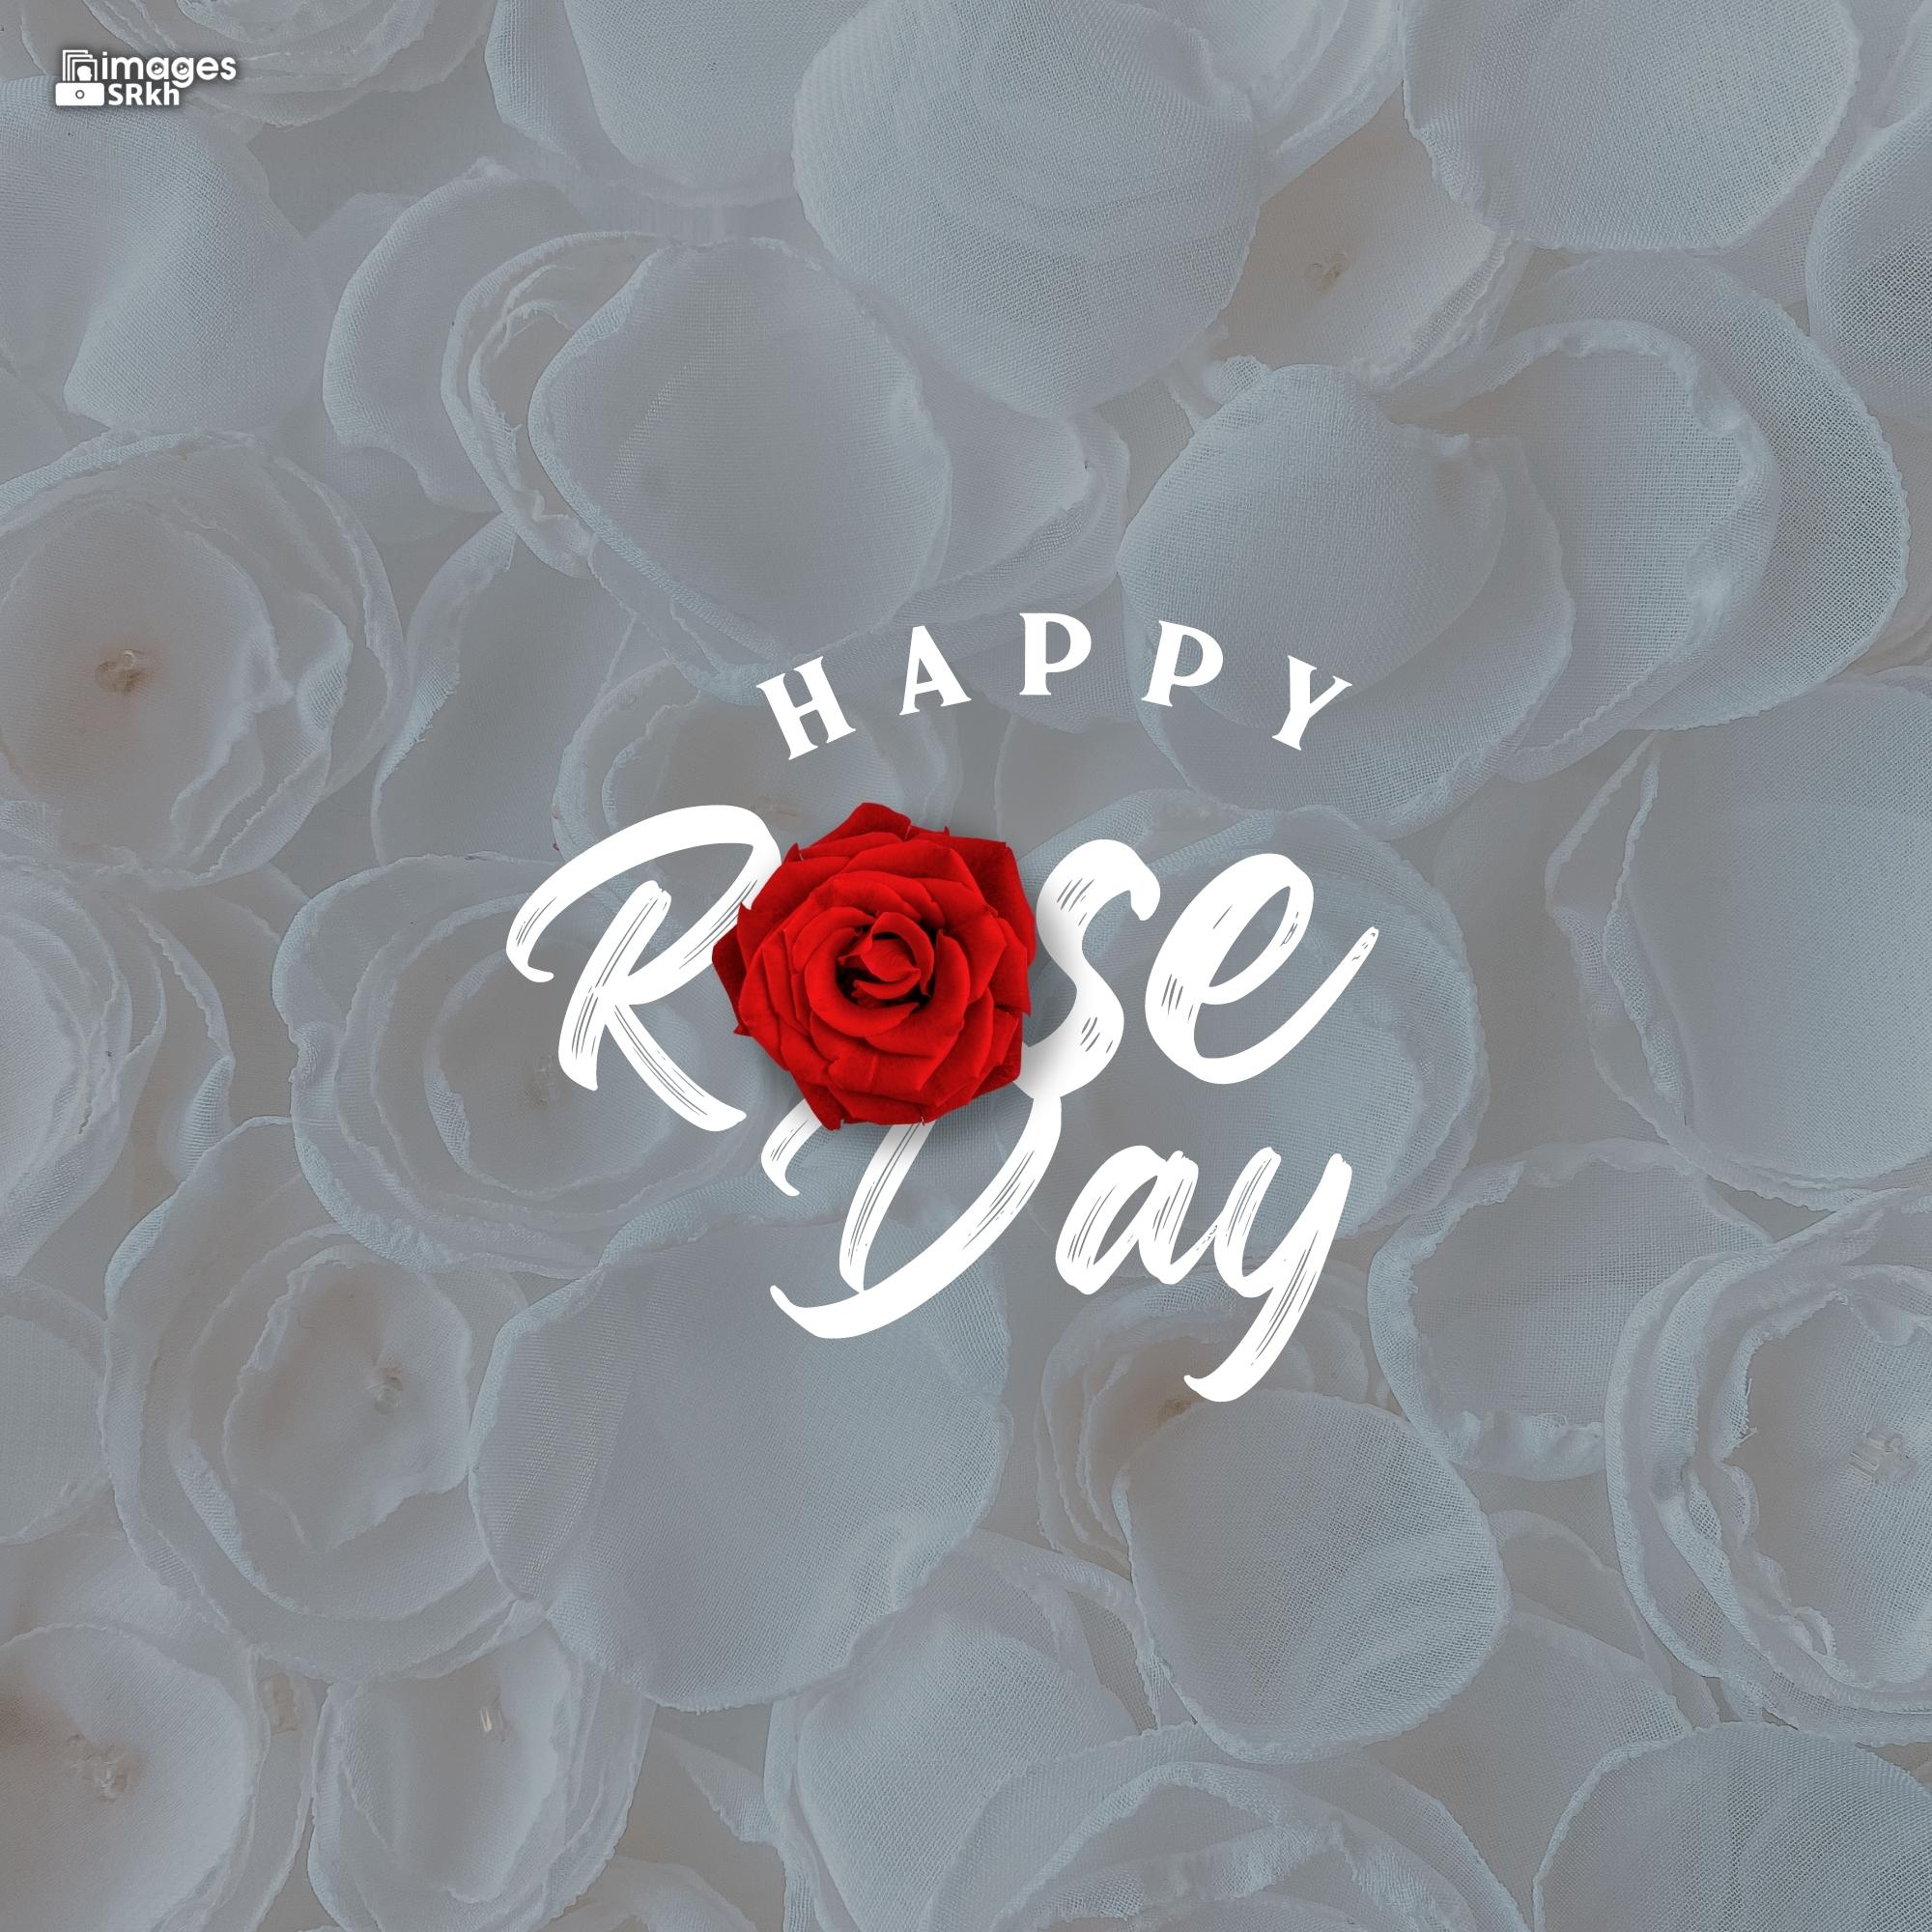 Happy Rose Day Image Hd Download (5)